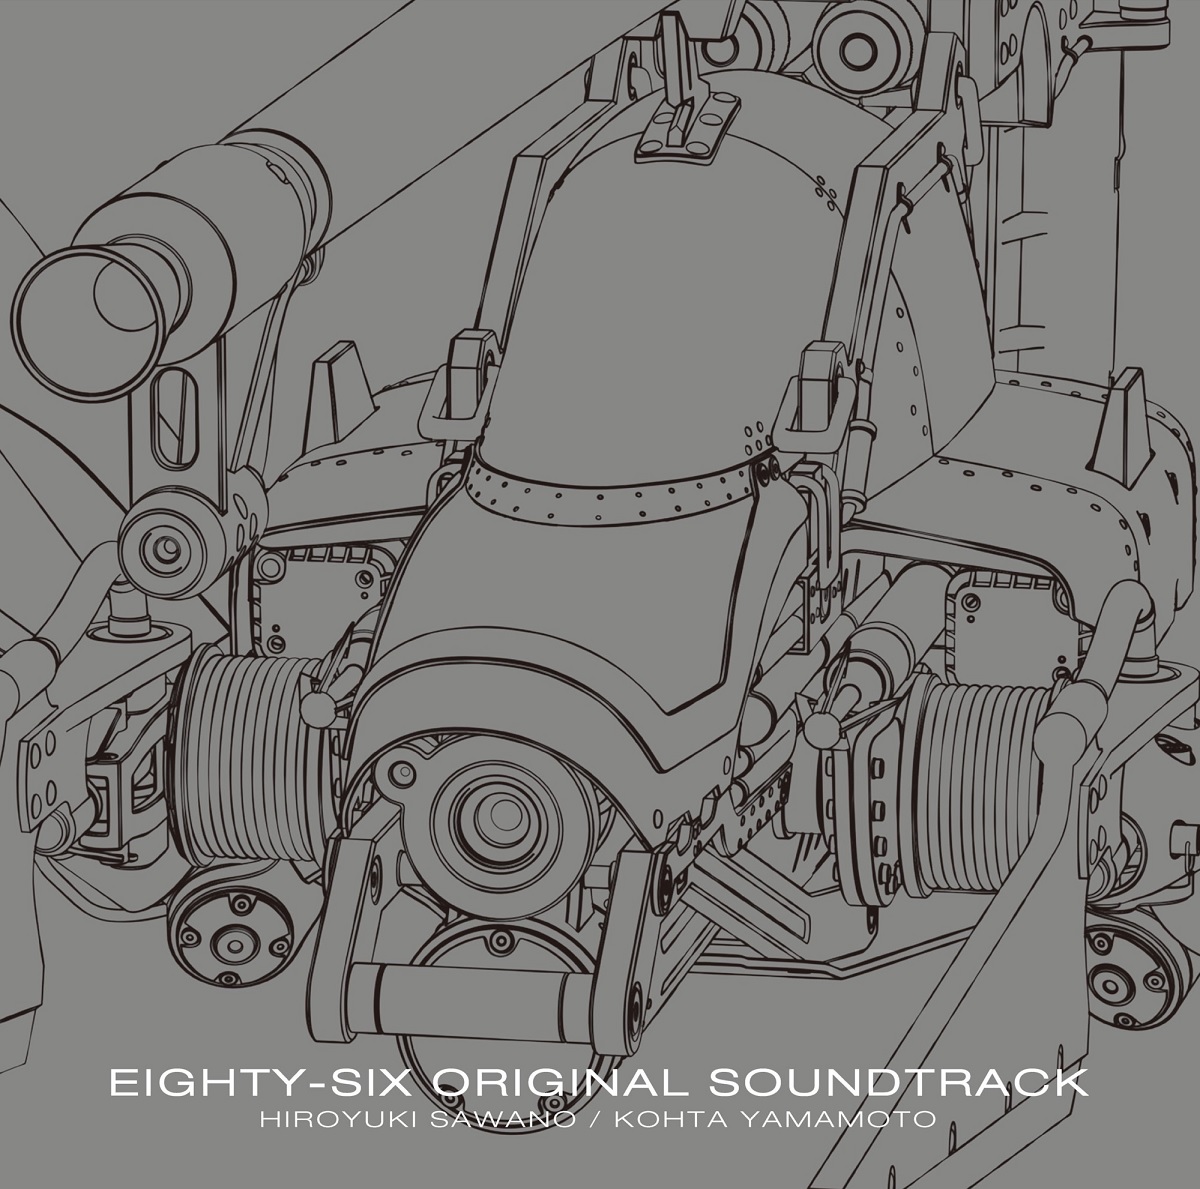 Cover art for『Hiroyuki Sawano feat. Laco - THE ANSWER』from the release『EIGHTY-SIX ORIGINAL SOUNDTRACK』